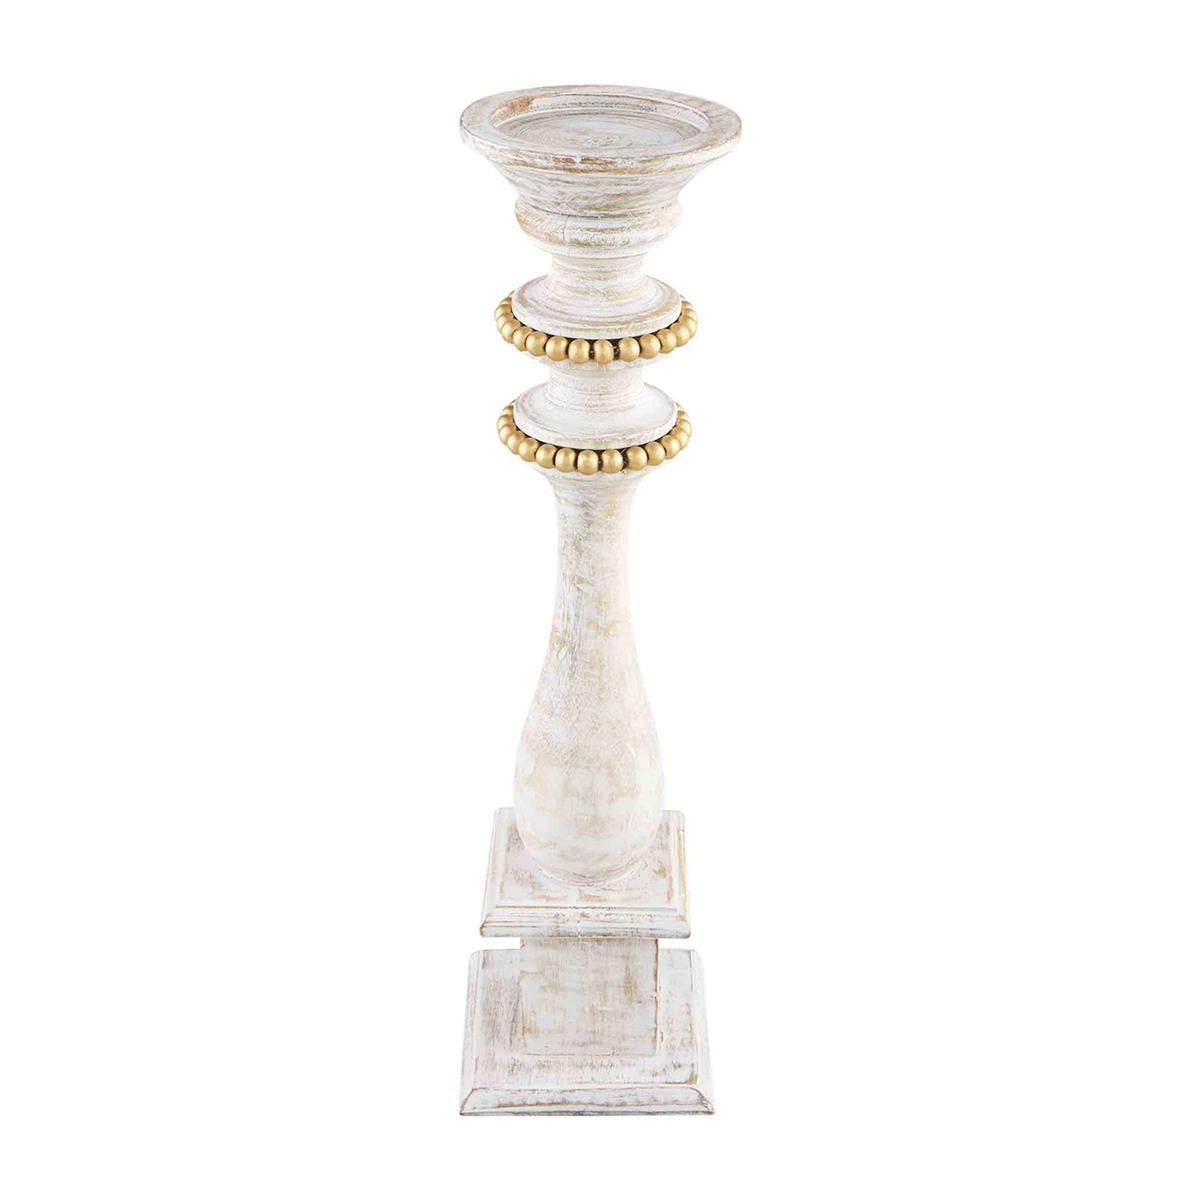 medium gold bead candlestick displayed against a white background